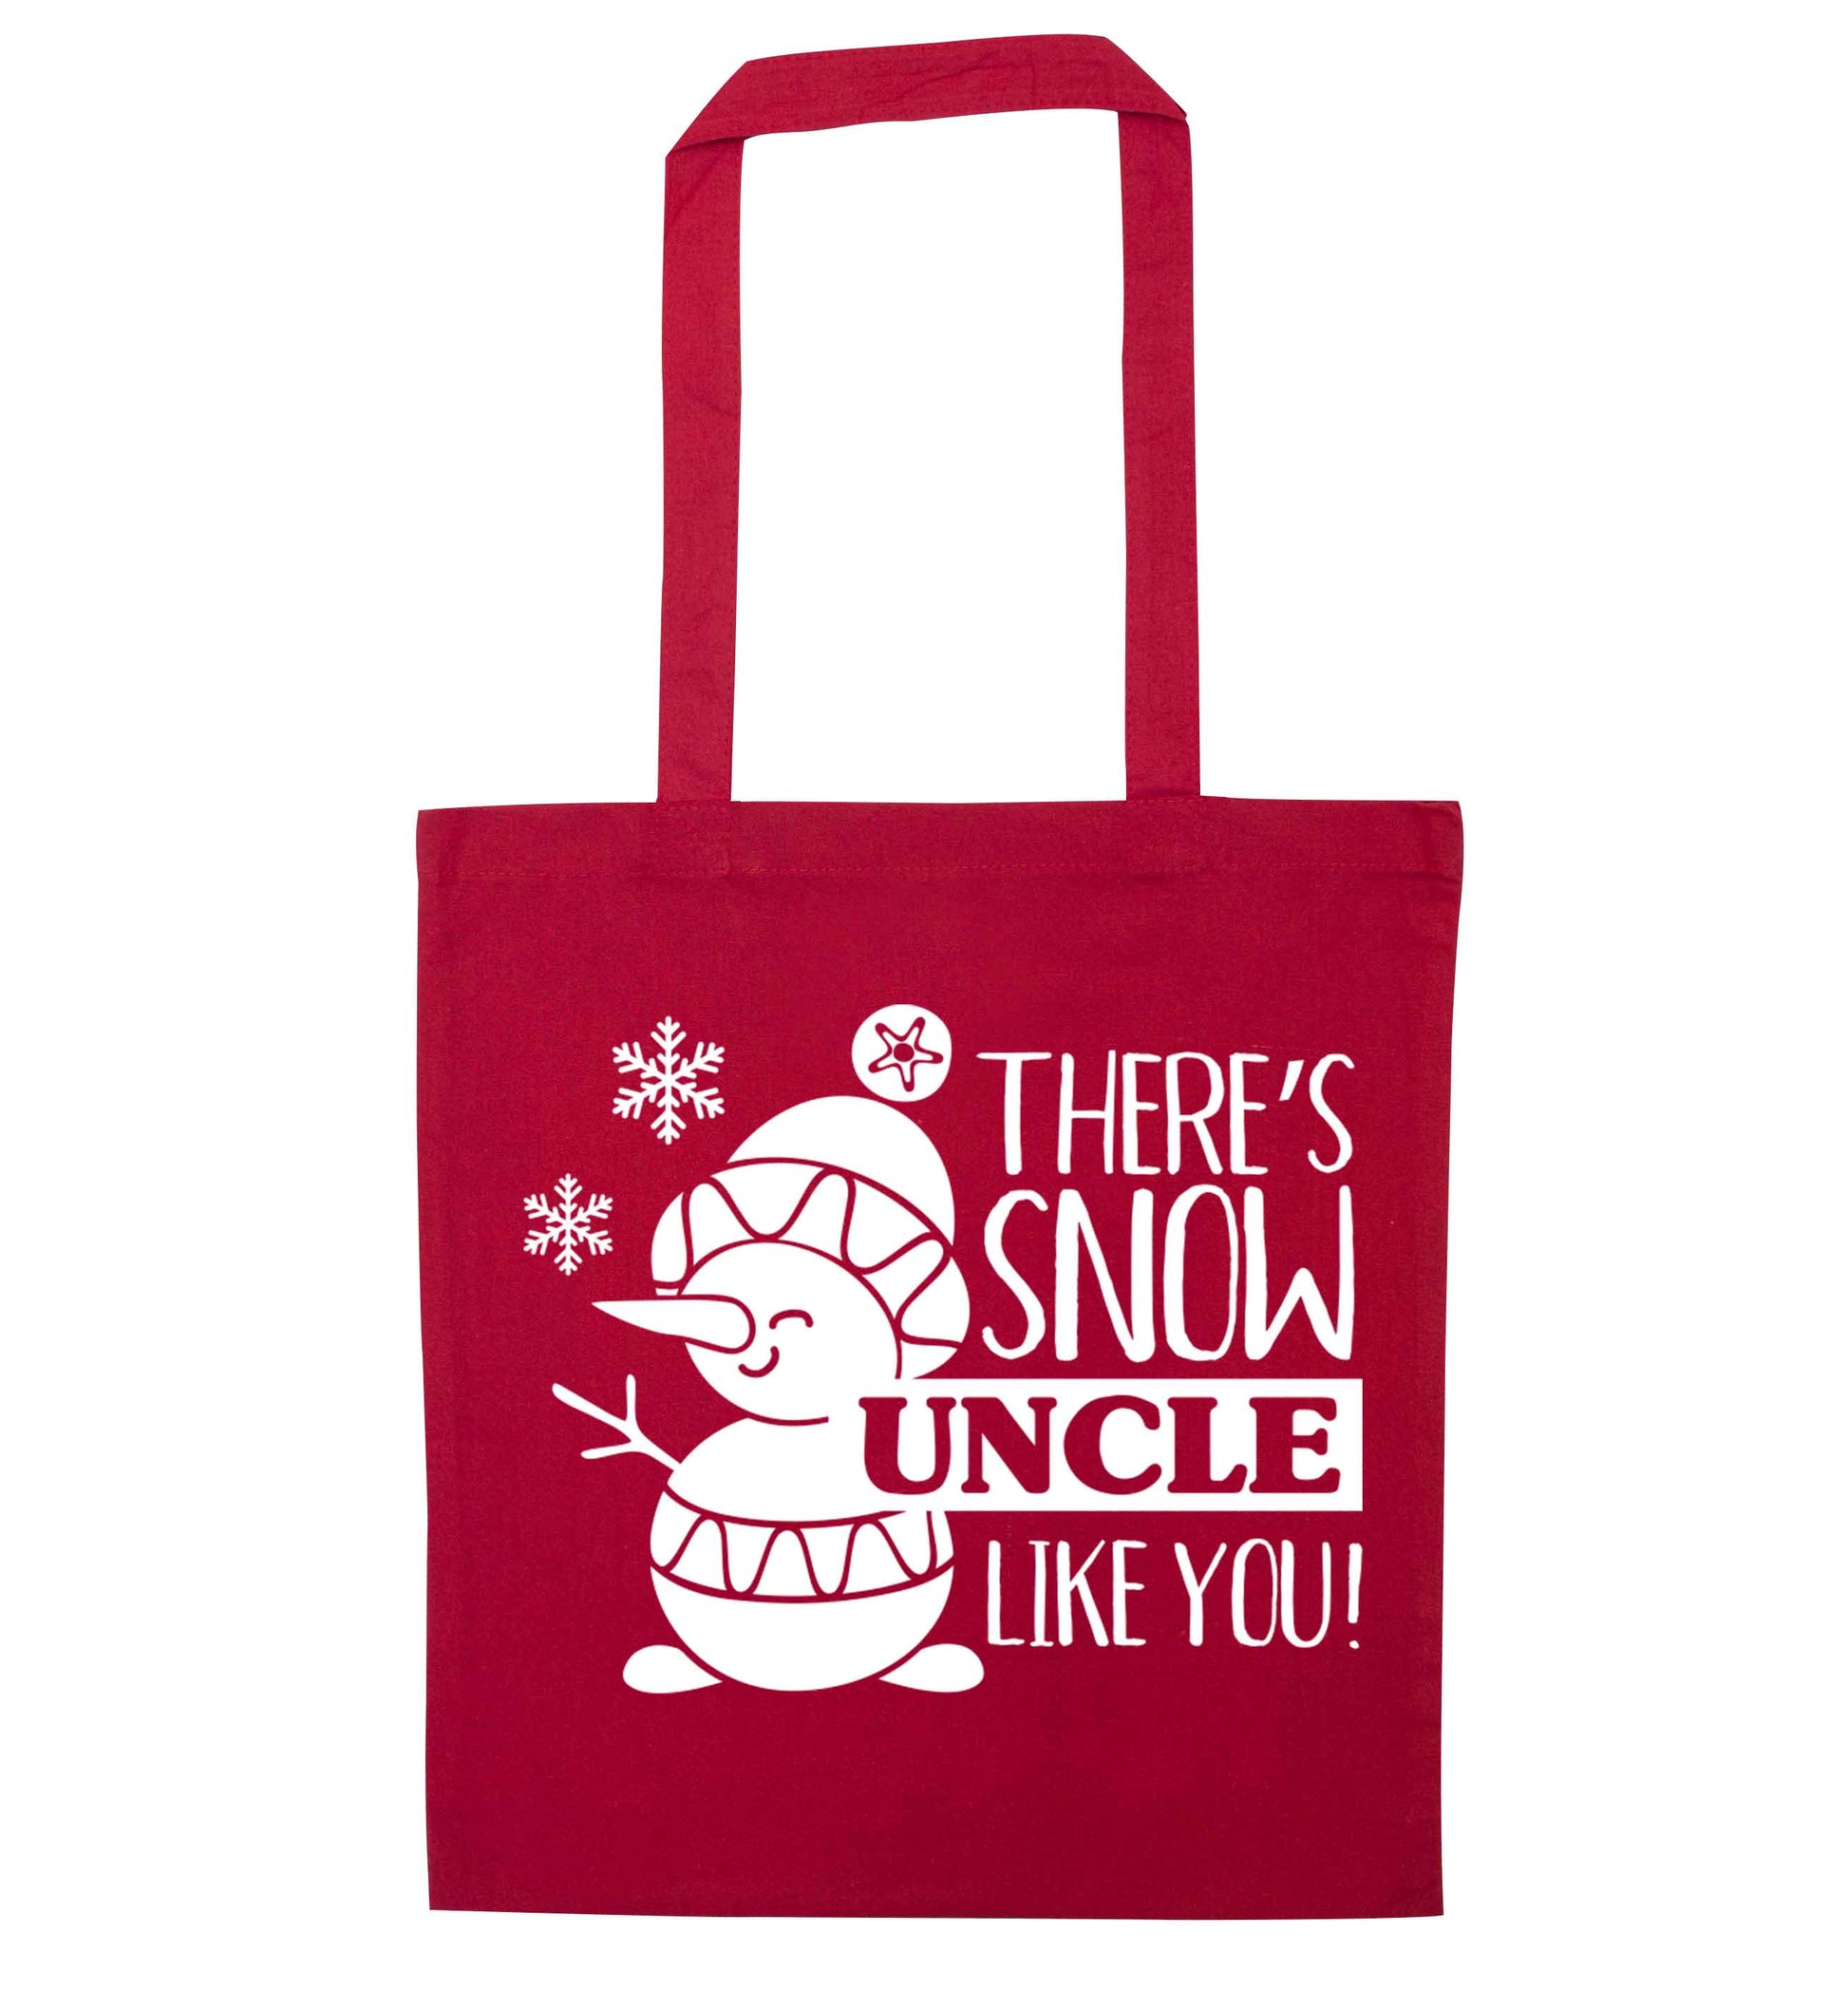 There's snow uncle like you red tote bag